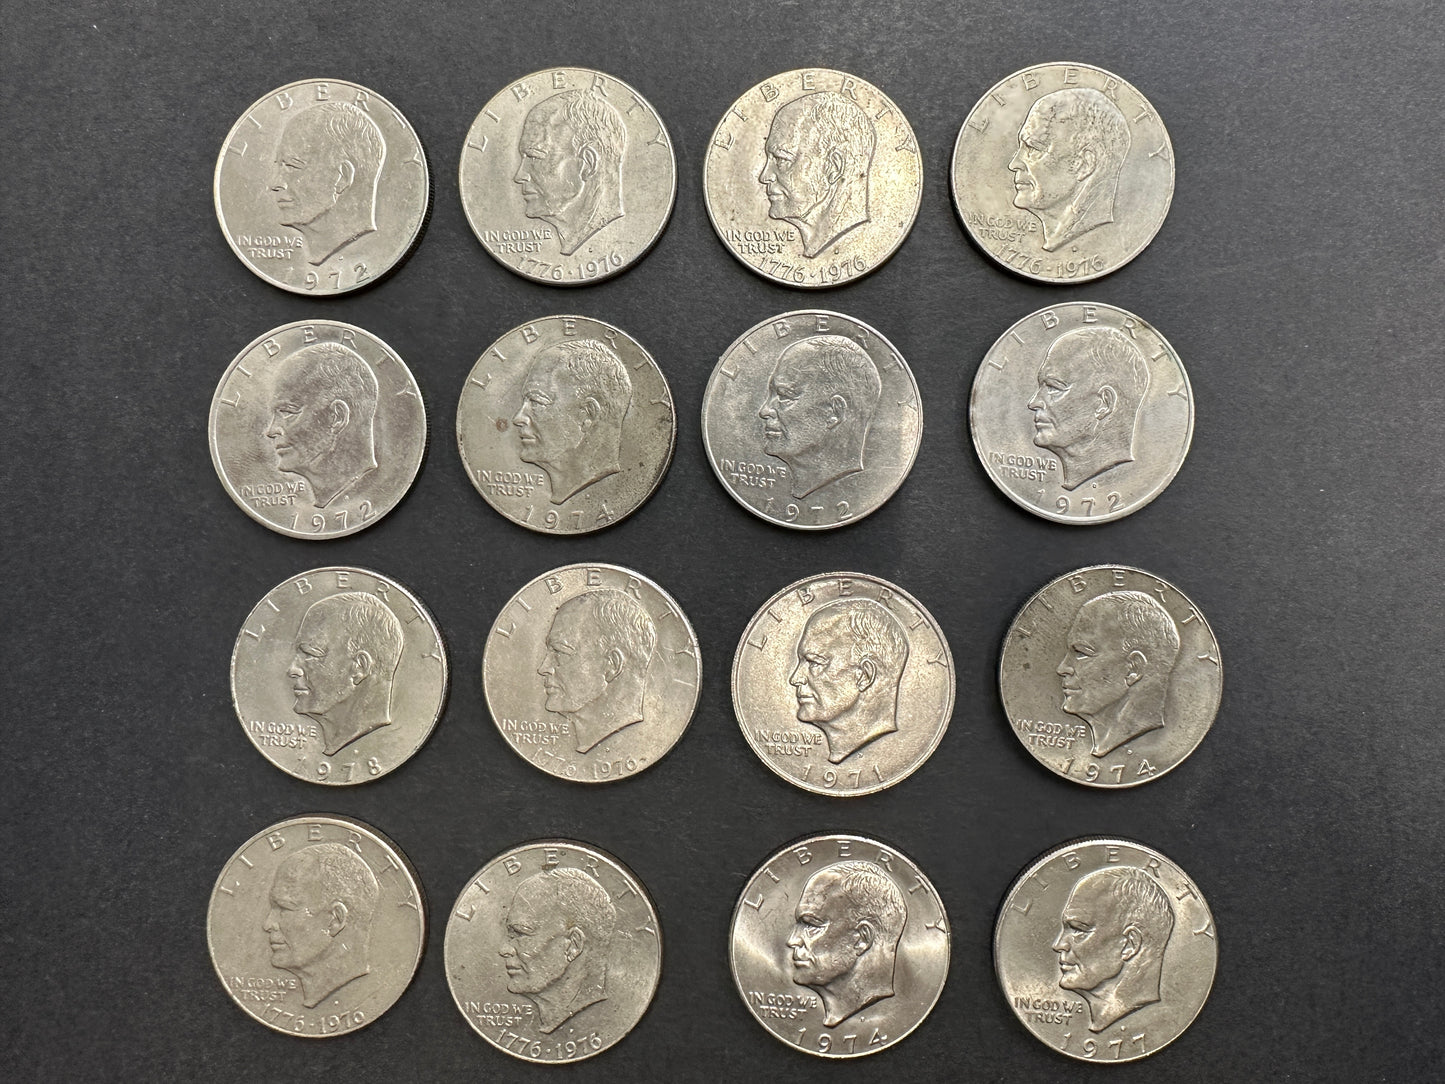 16 x USA American Eisenhower $1 One Dollar US Coins - Very Collectible